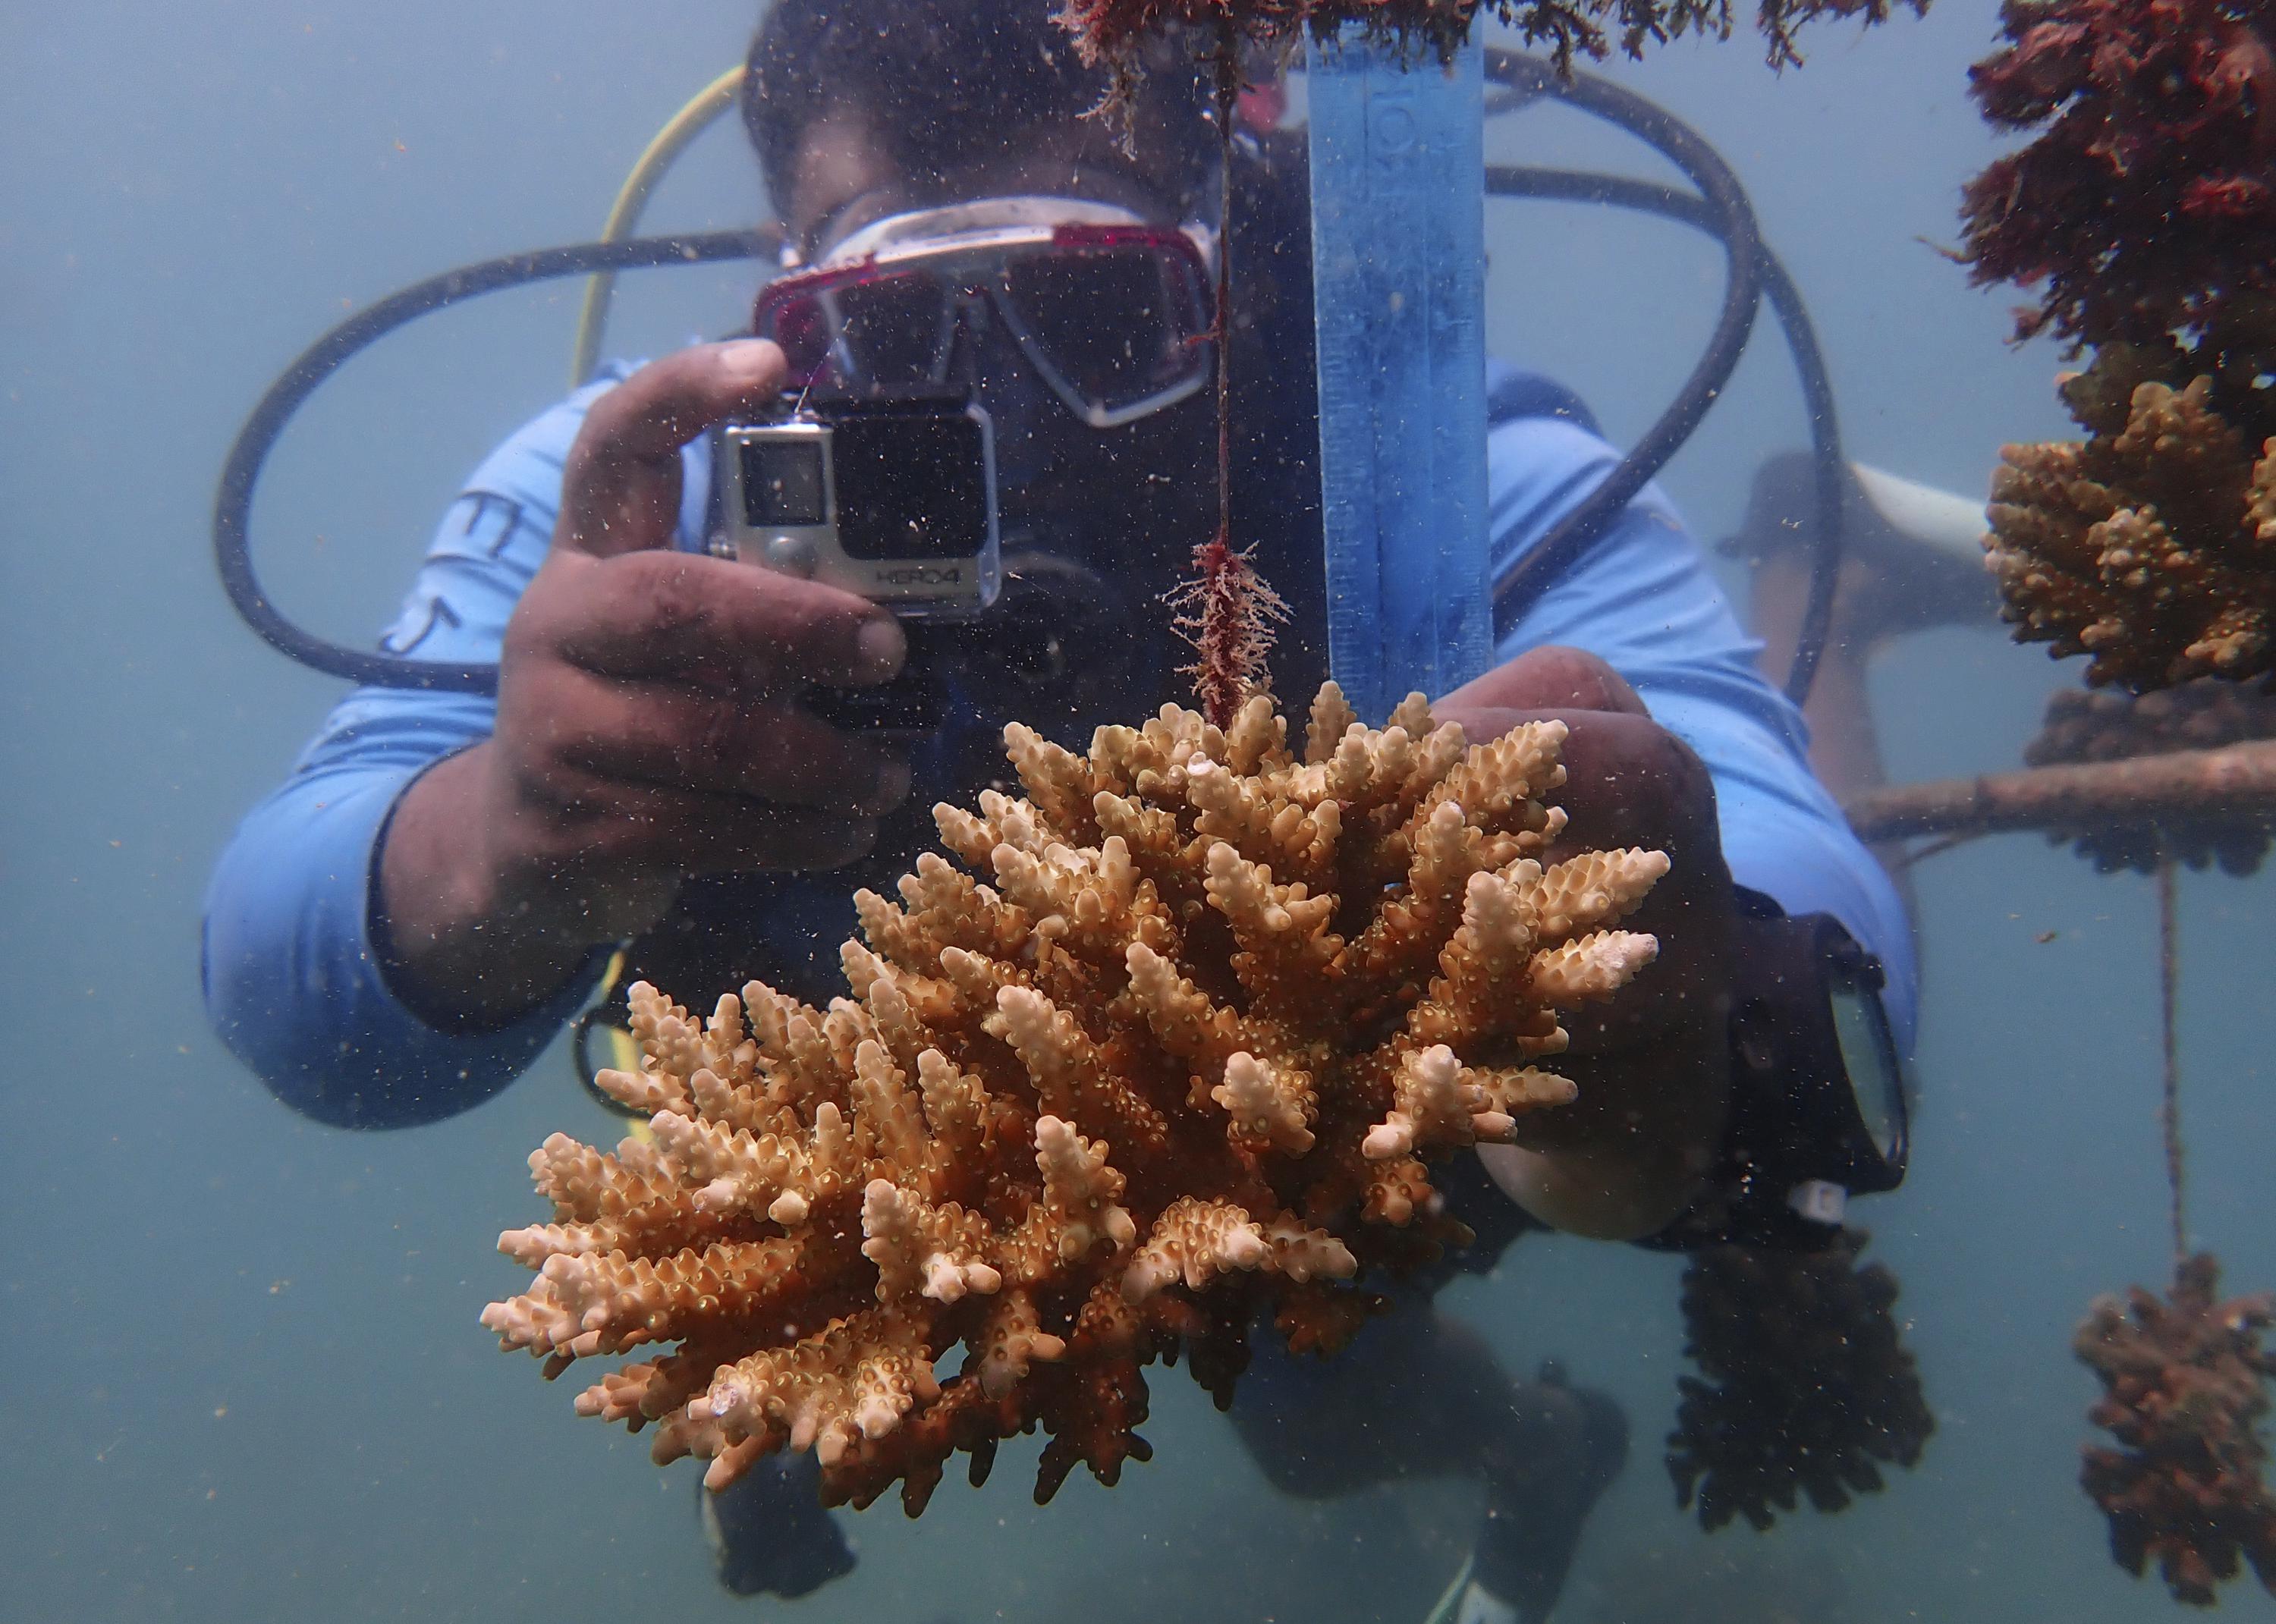 How One Company Is Restoring Coral To Combat Climate Change's Coastal Impact